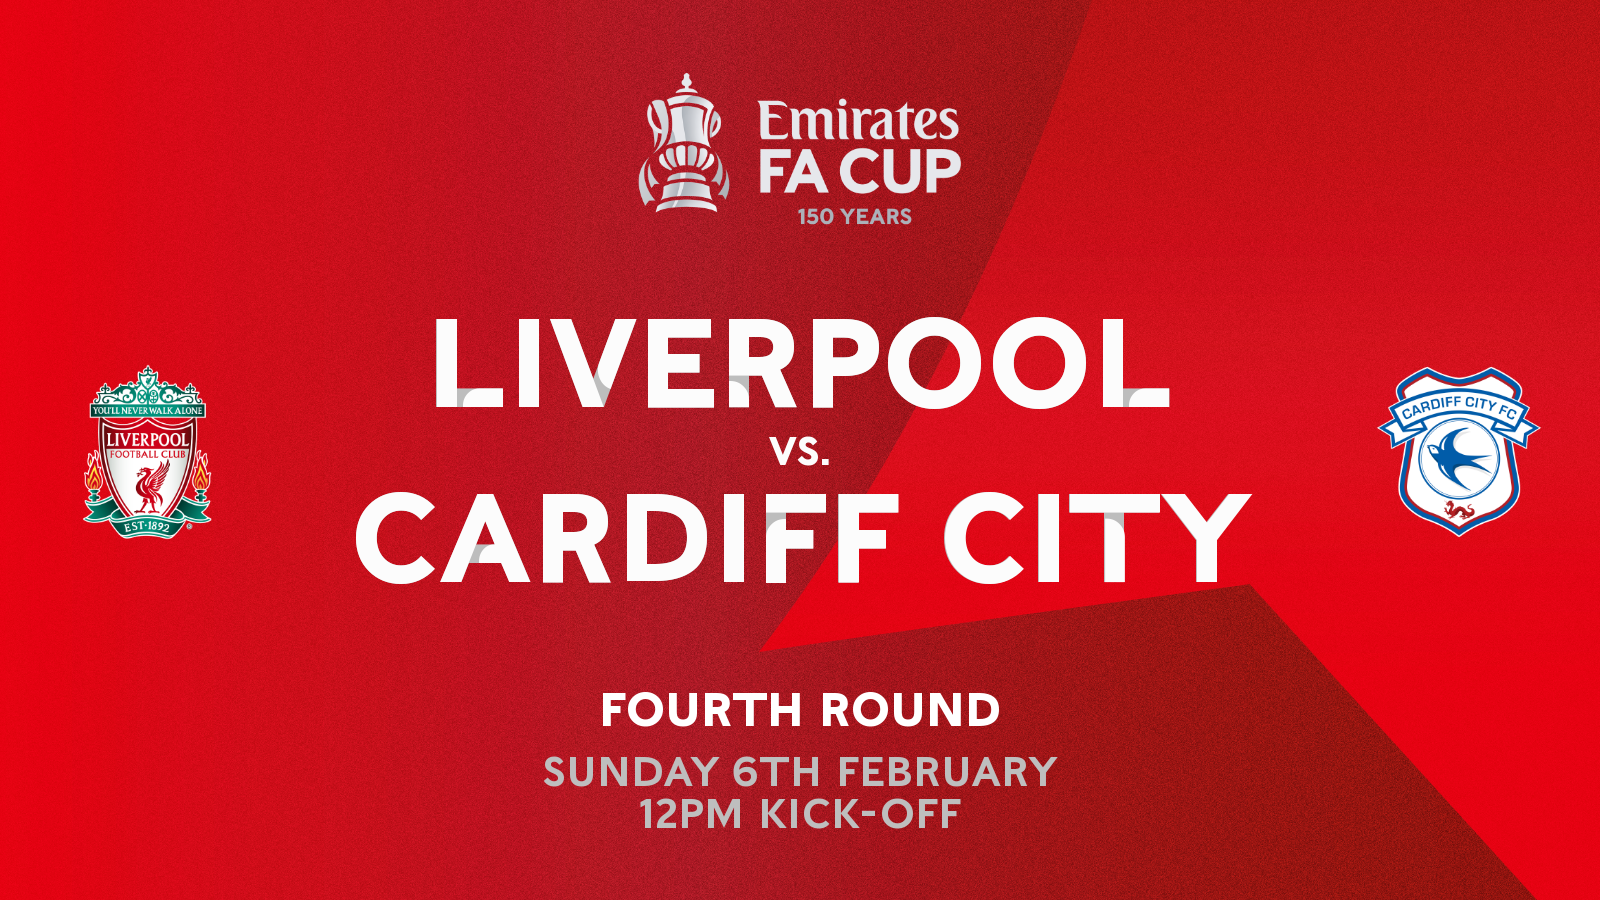 Liverpool vs. Cardiff City will be shown live on ITV!